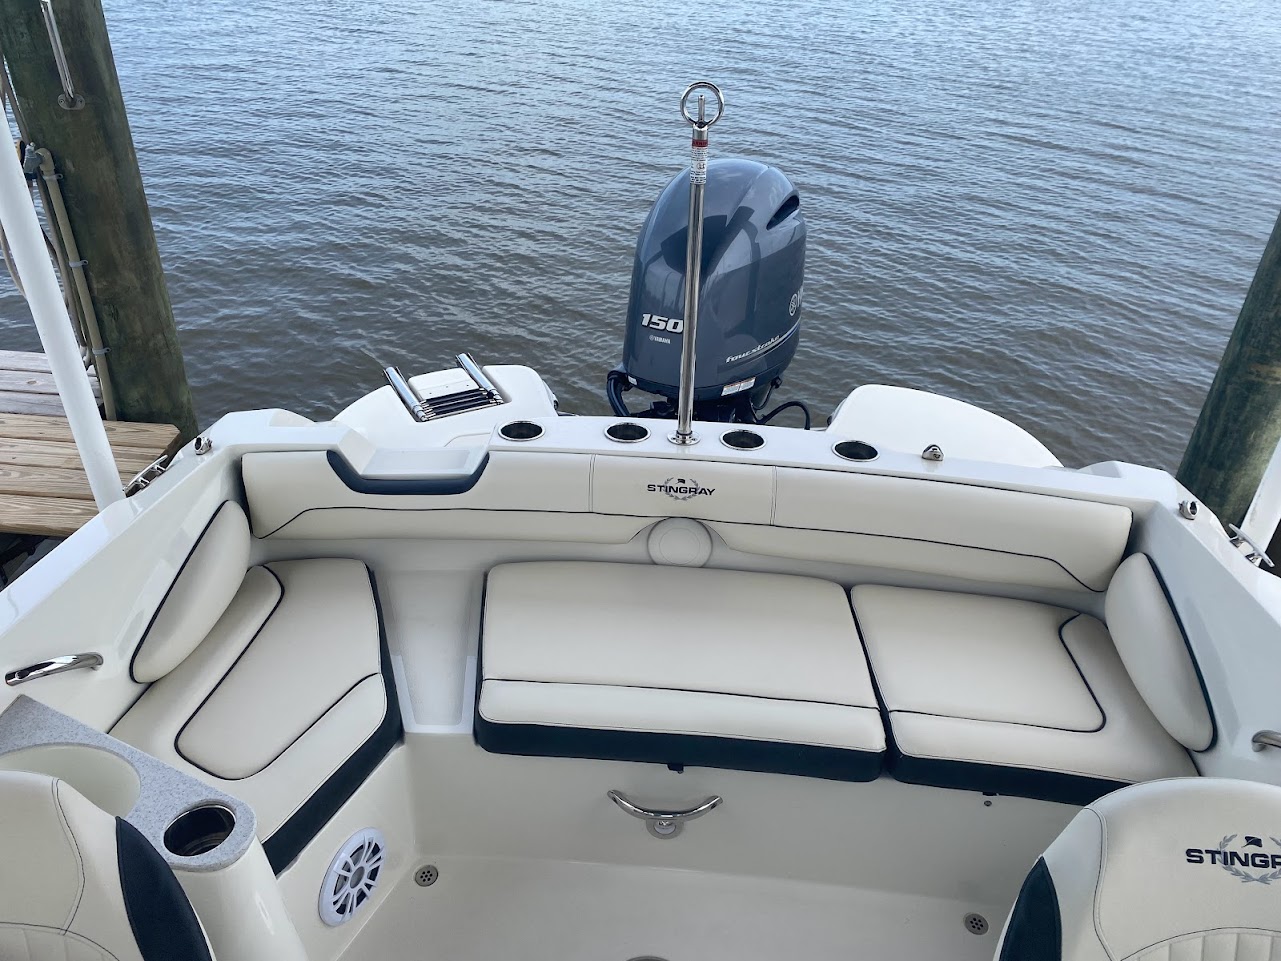 2022 Stingray 201DC Power boat for sale in Palm Coast, FL - image 11 